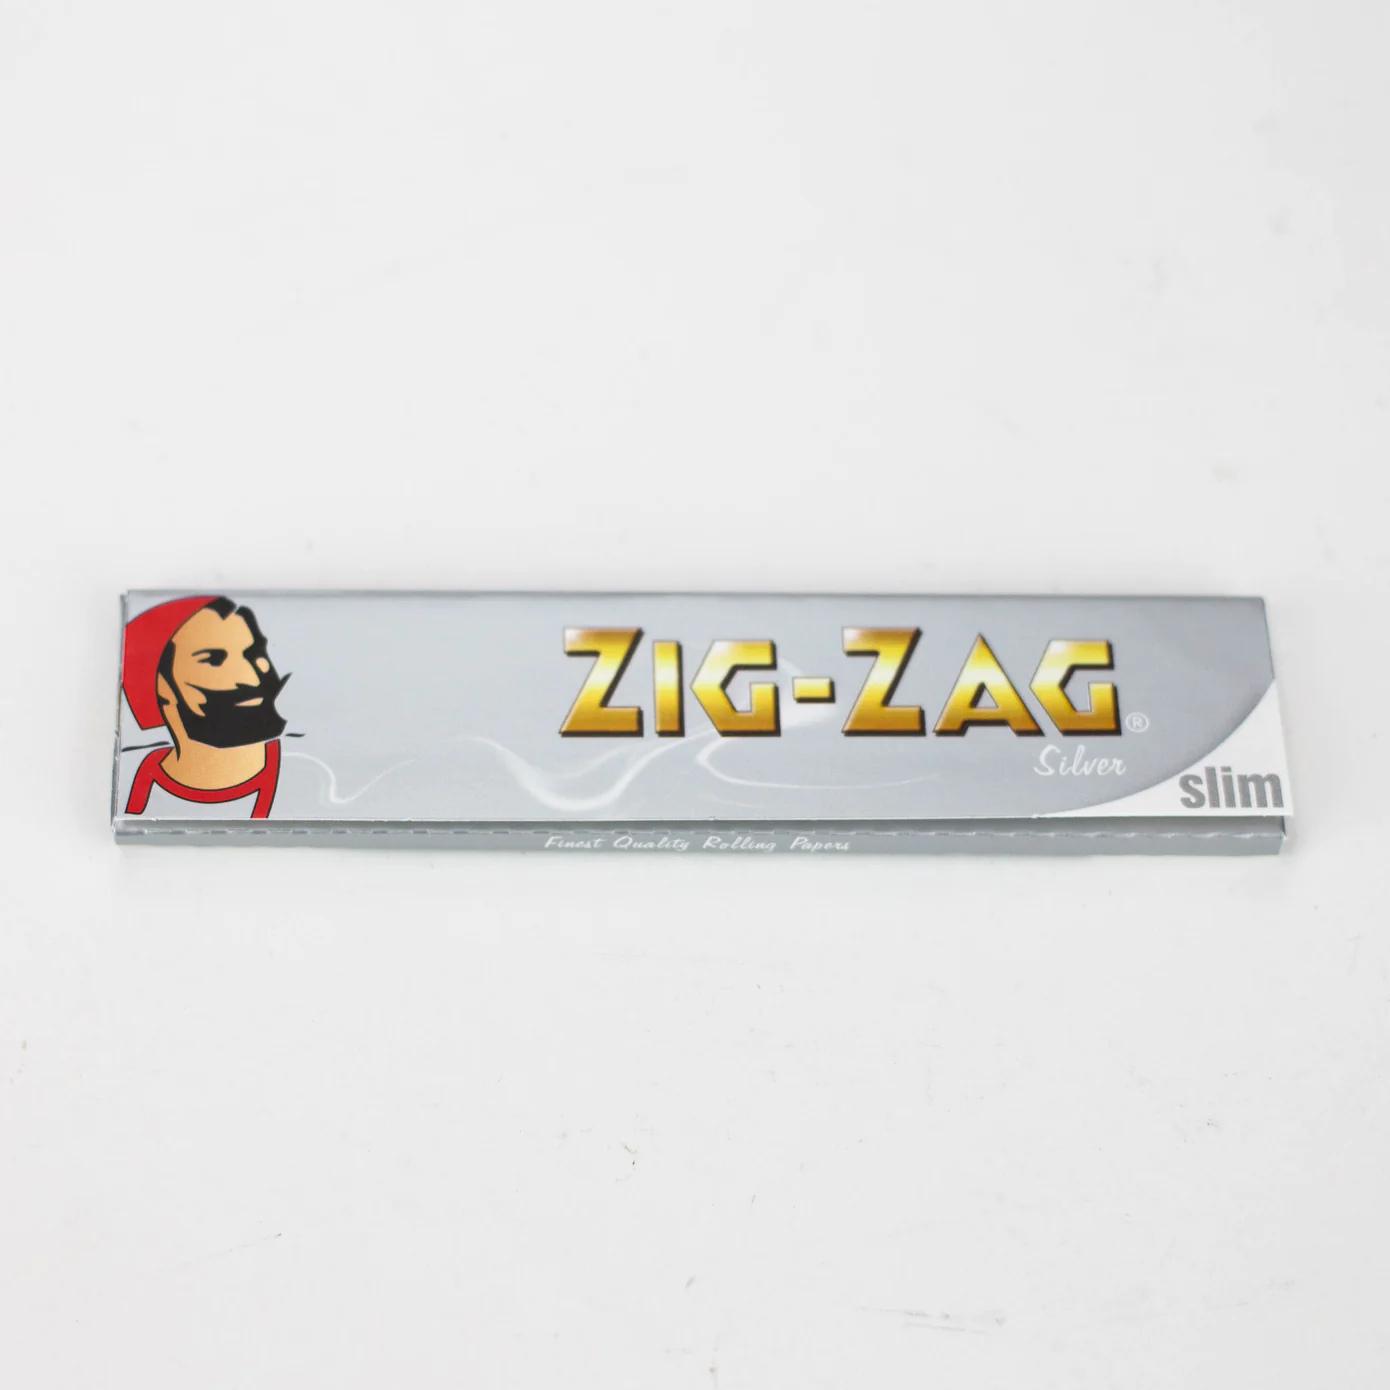 ZIG-ZAG silver King slim rolling papers